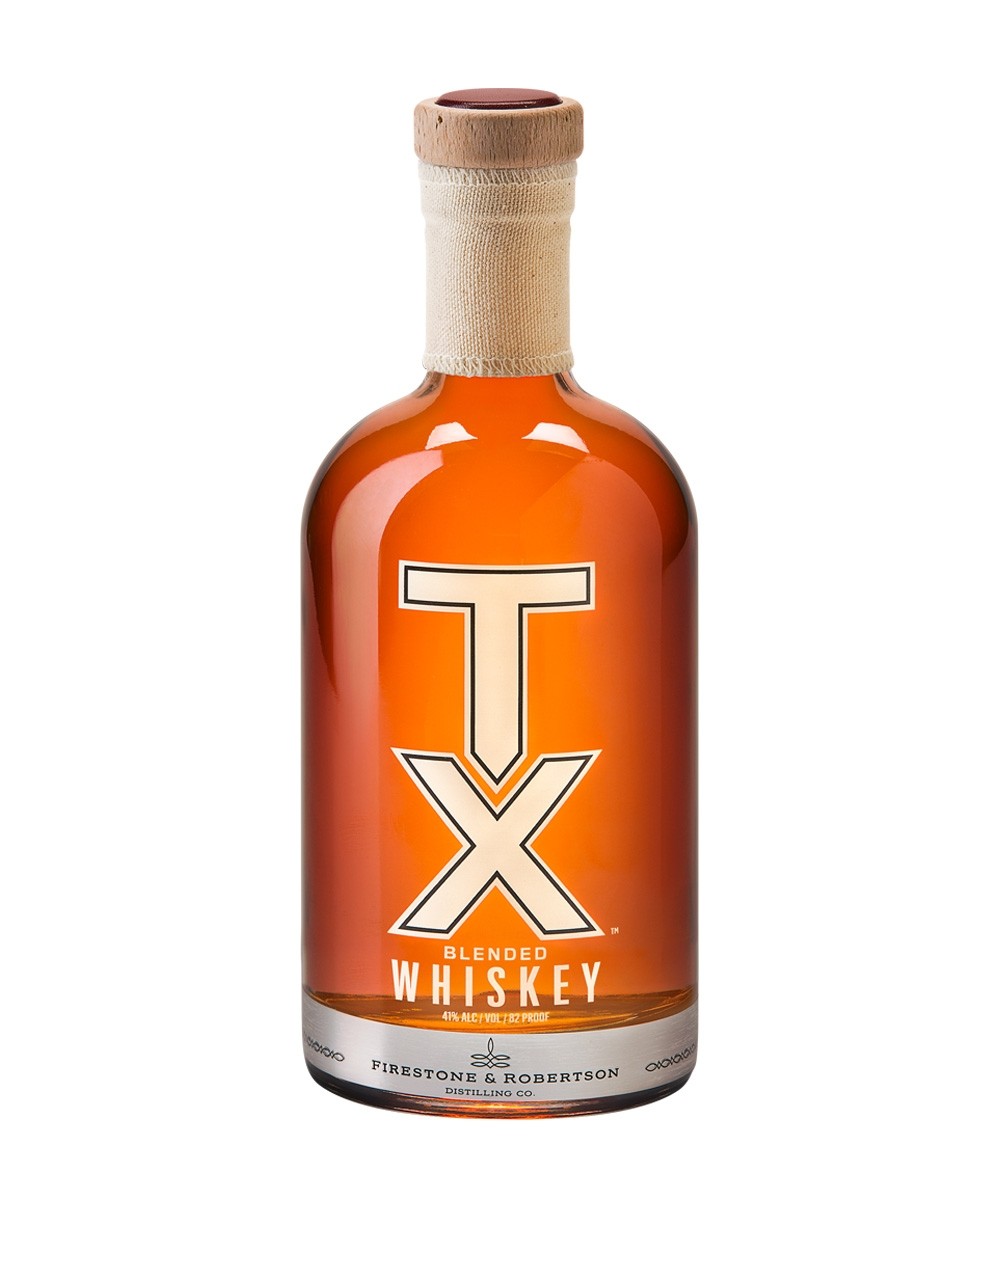 TX Whiskey | Buy Online or Send as a Gift | ReserveBar